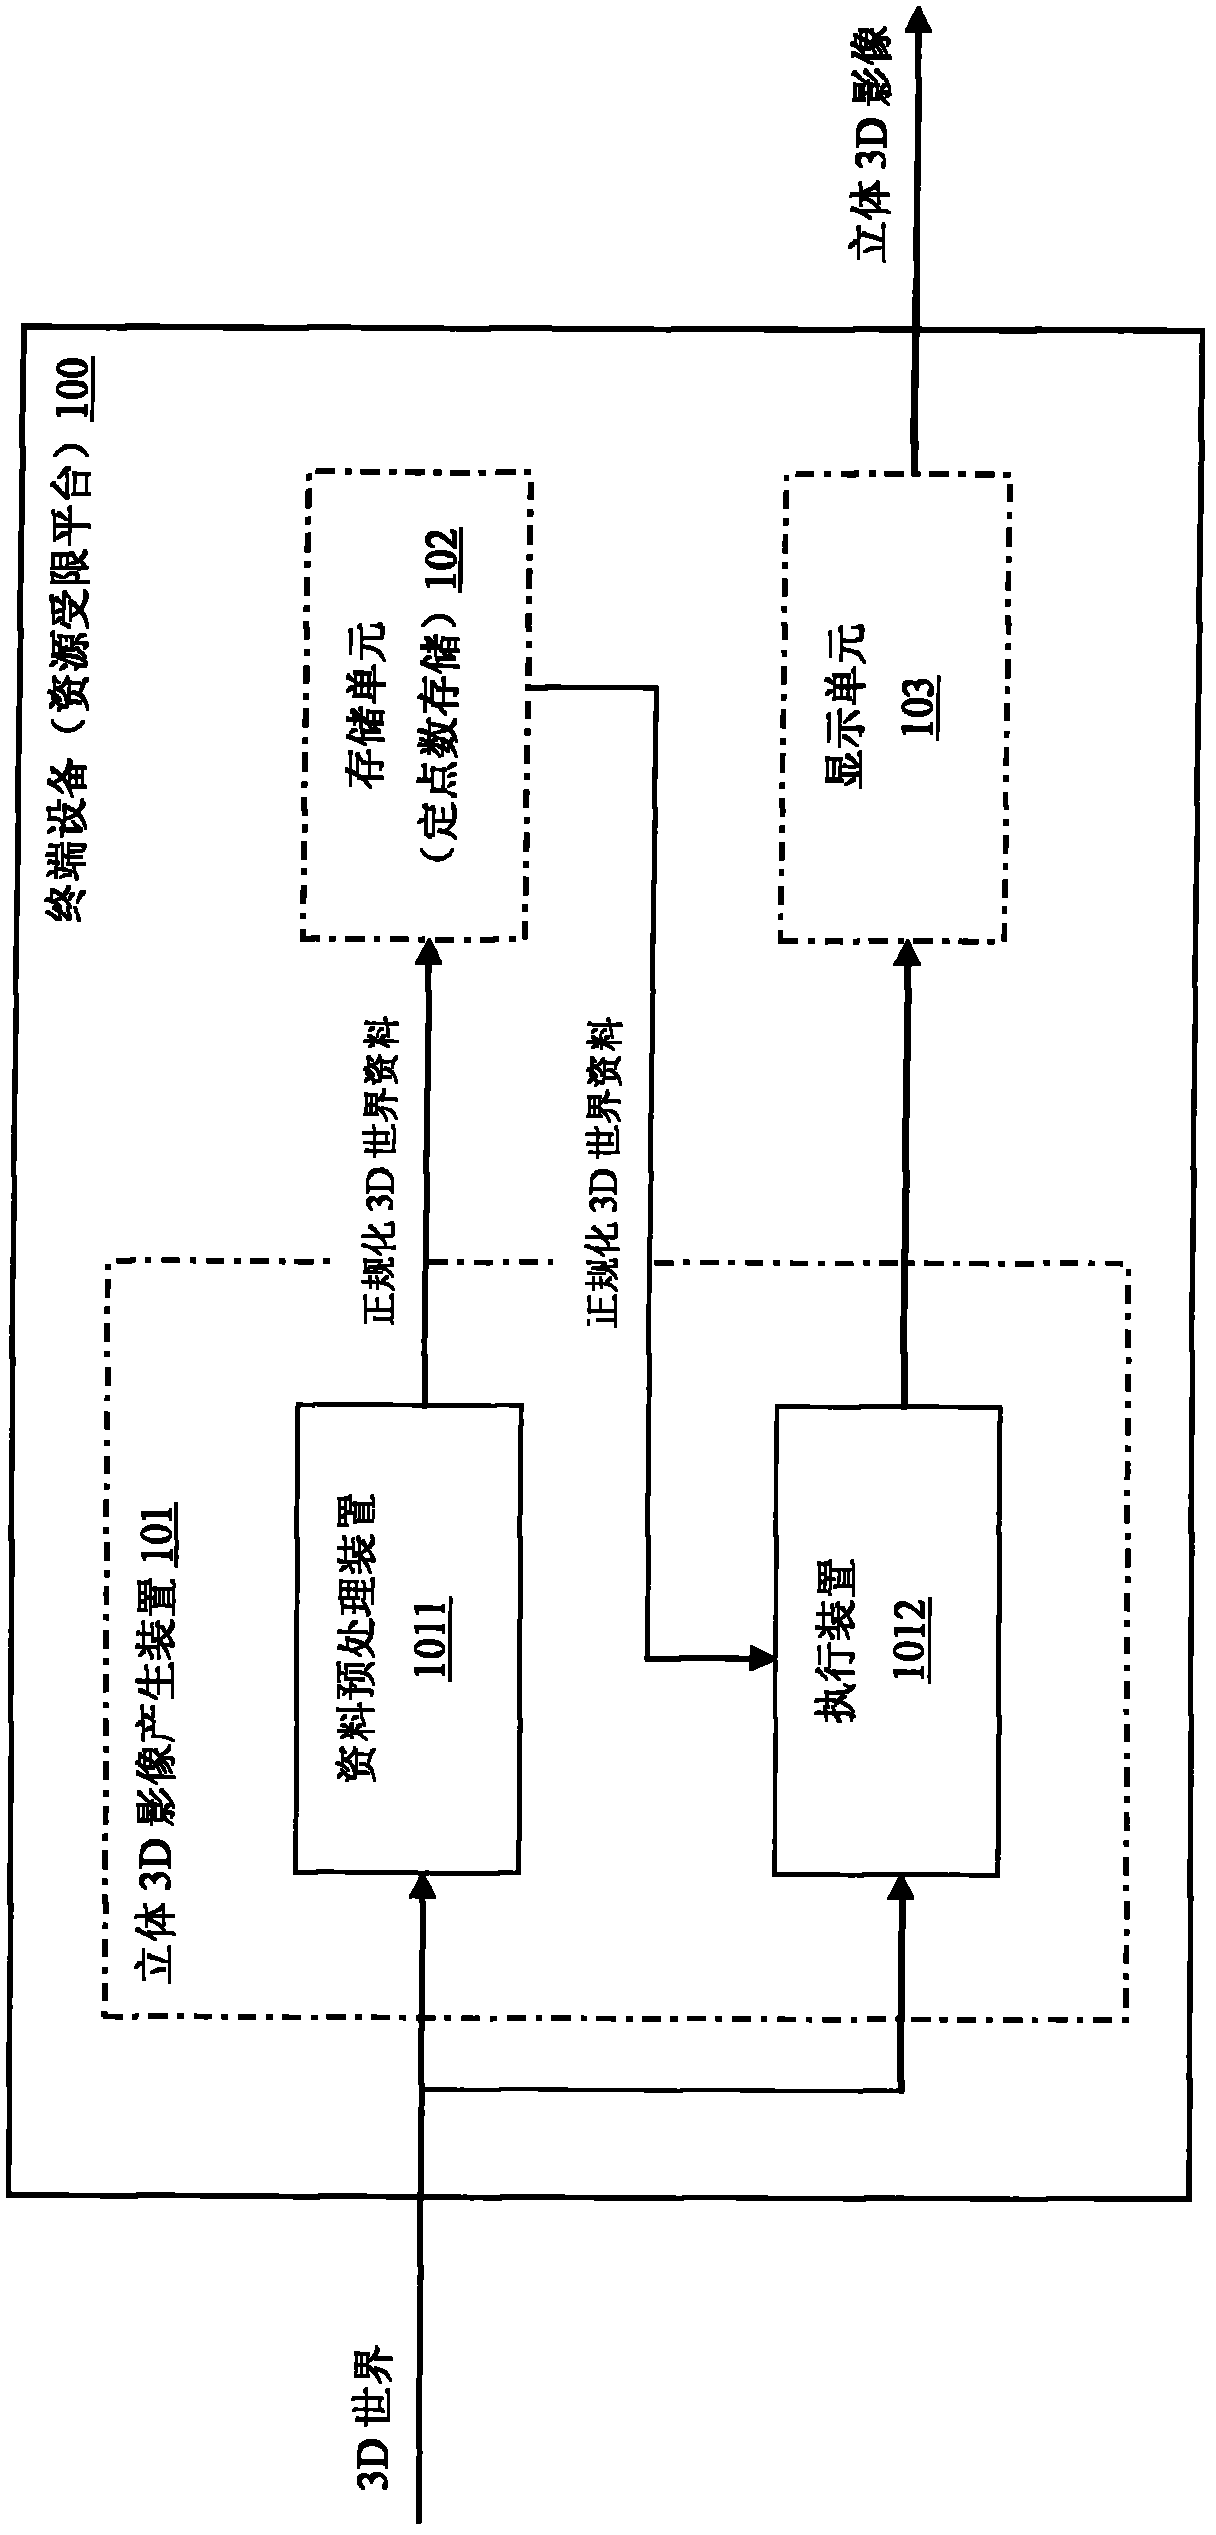 Method and equipment used for generating three-dimensional (3D) video on a resource-limited device